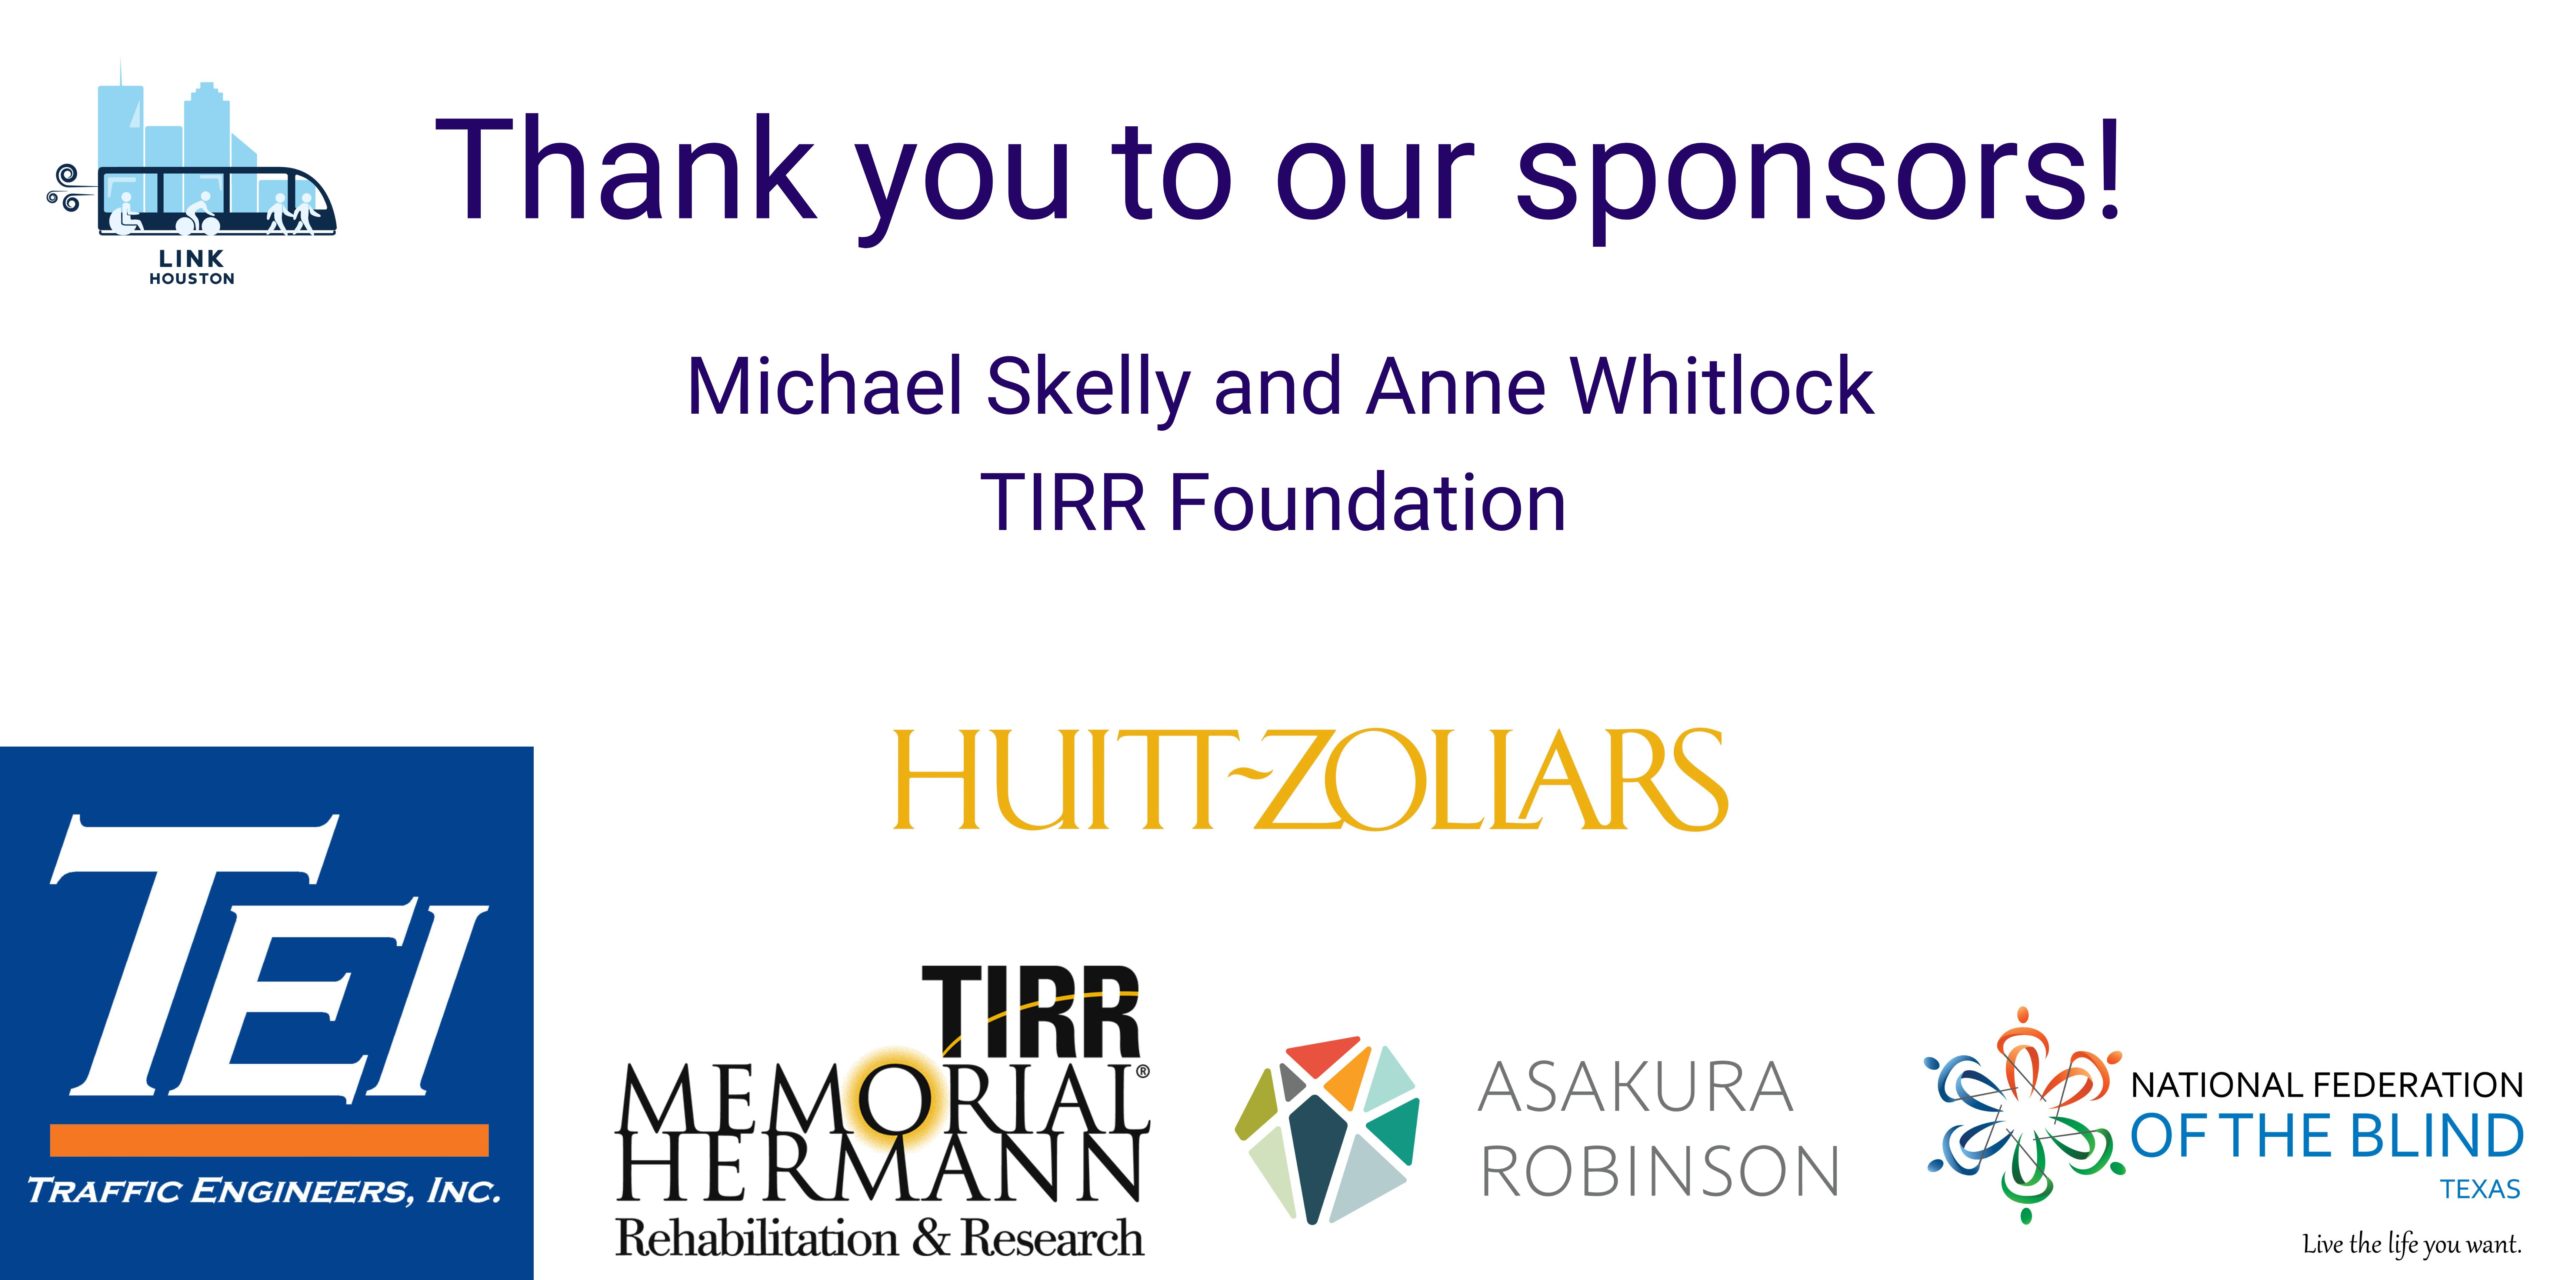 Thank you to our sponsors! Michael Skelly and Anne Whitlock TIRR Foundation logos of TEI, Huitt - Zollars, TIRR Memorial Hermann Rehabilitation & Research, Asakura Robinson, Federation of the Blind of Texas